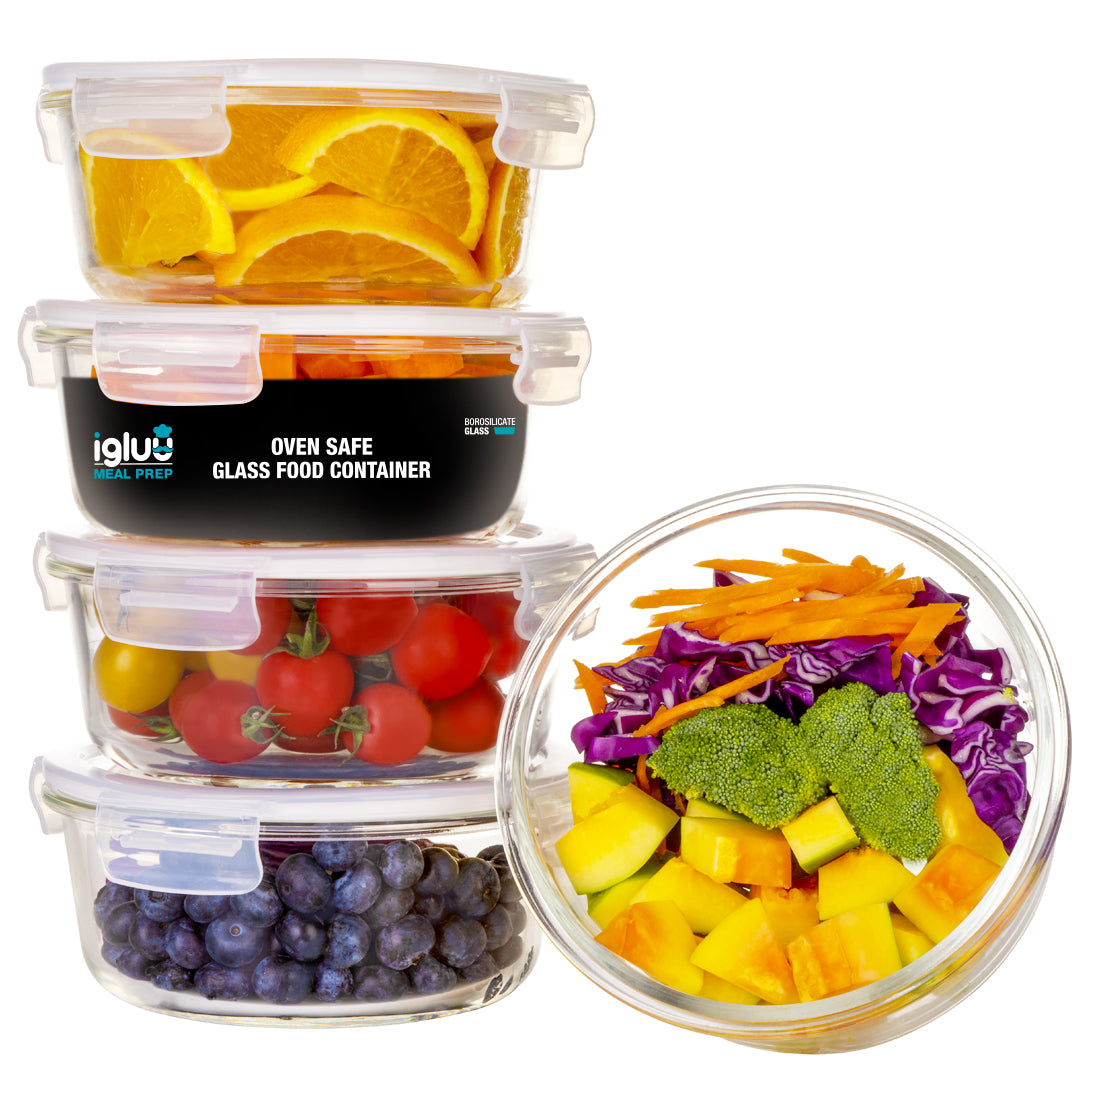 Round Meal Prep Containers, 10 Pack